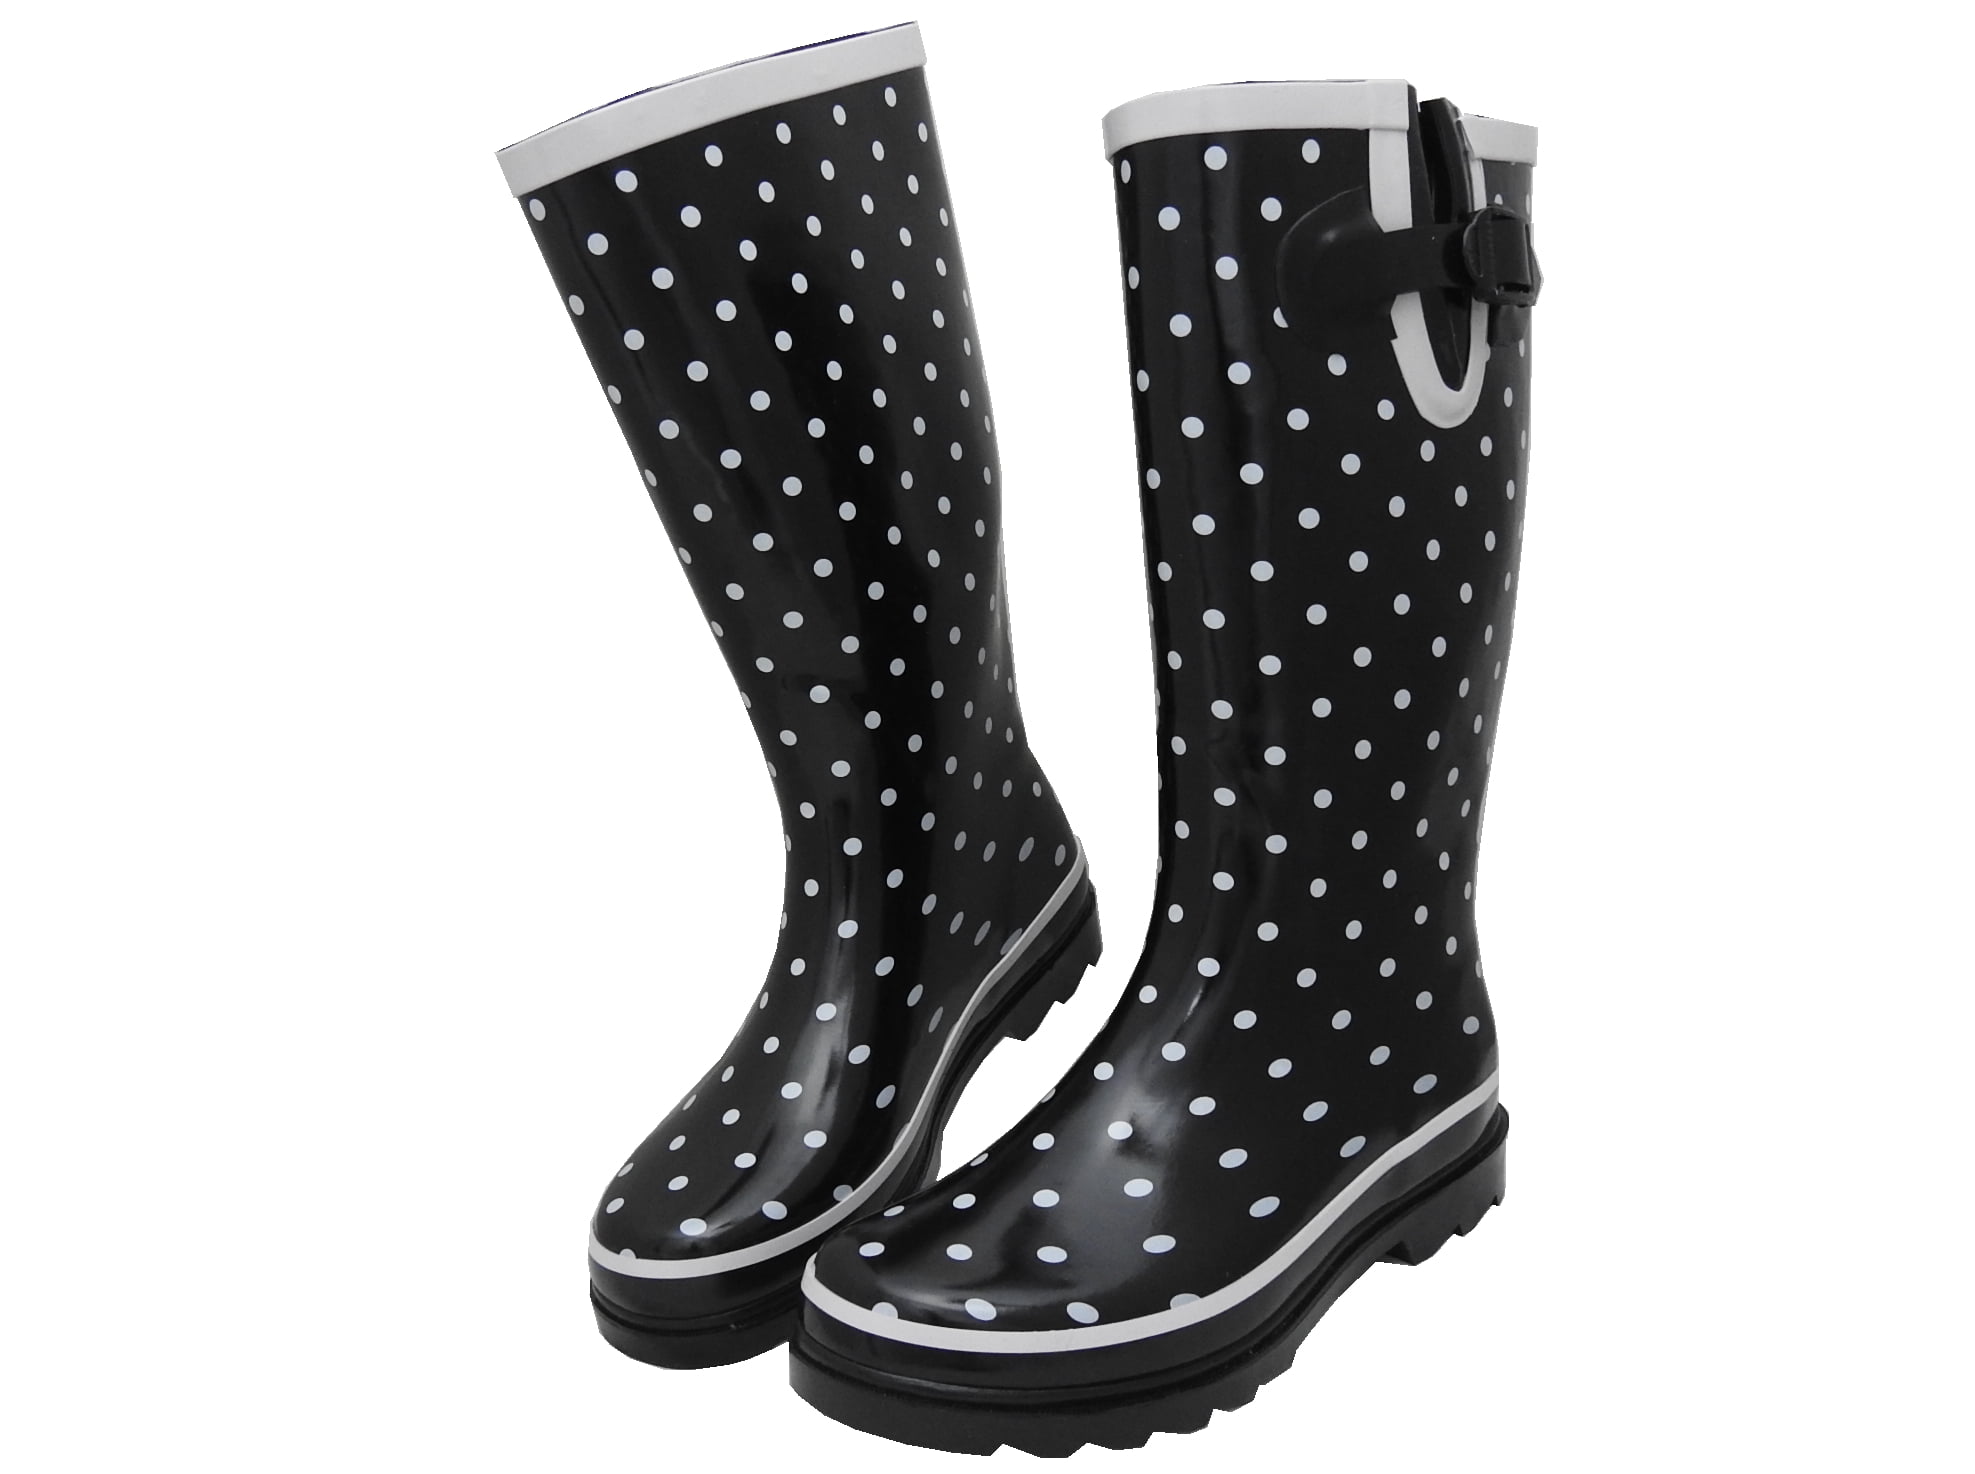 Starbay Women's Rubber Rain Boots, White Polka Dots with White Contrast ...